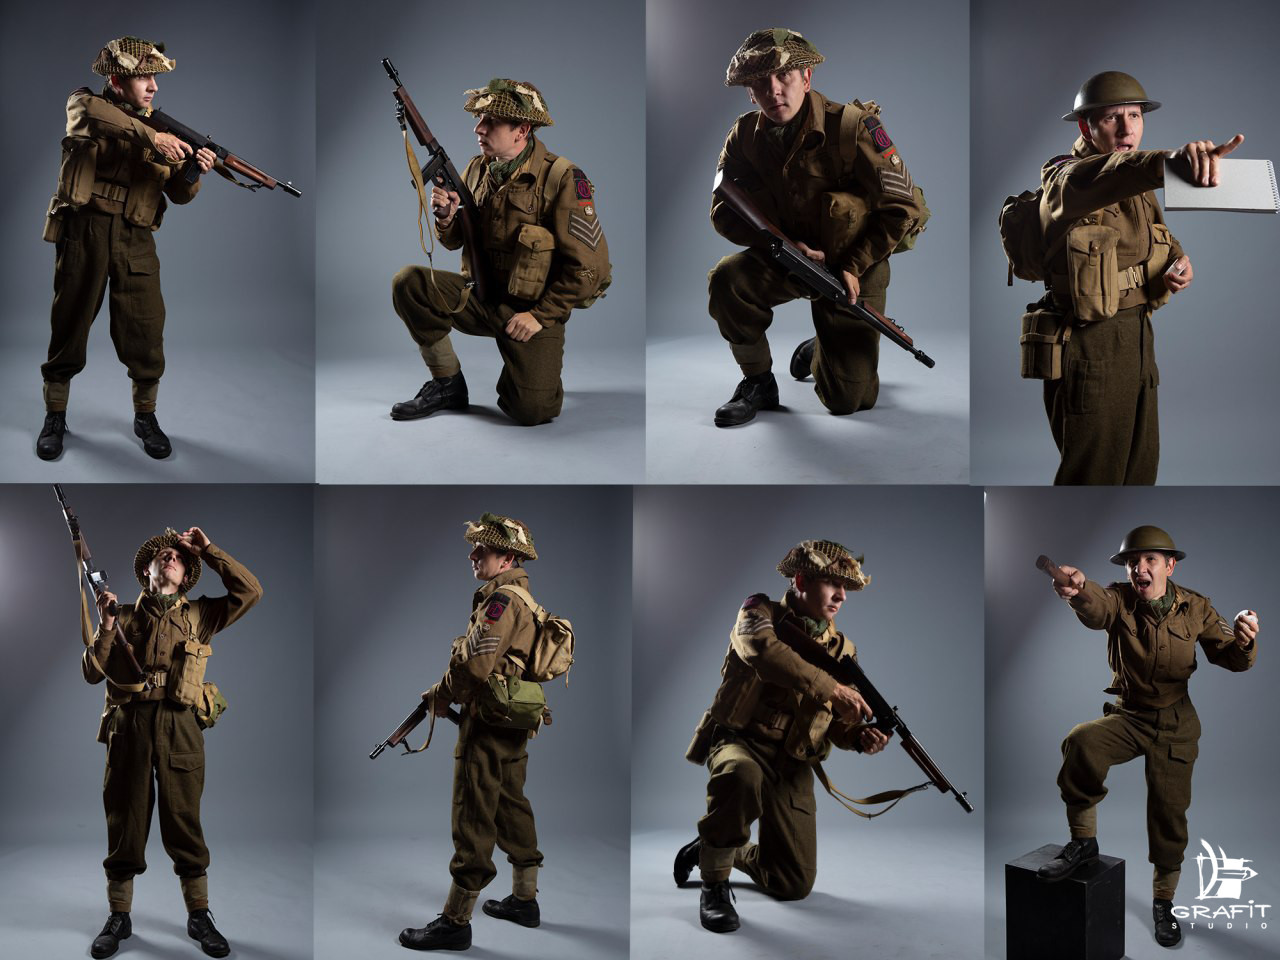 ArtStation - Tactical Gear Military Outfit References Pack